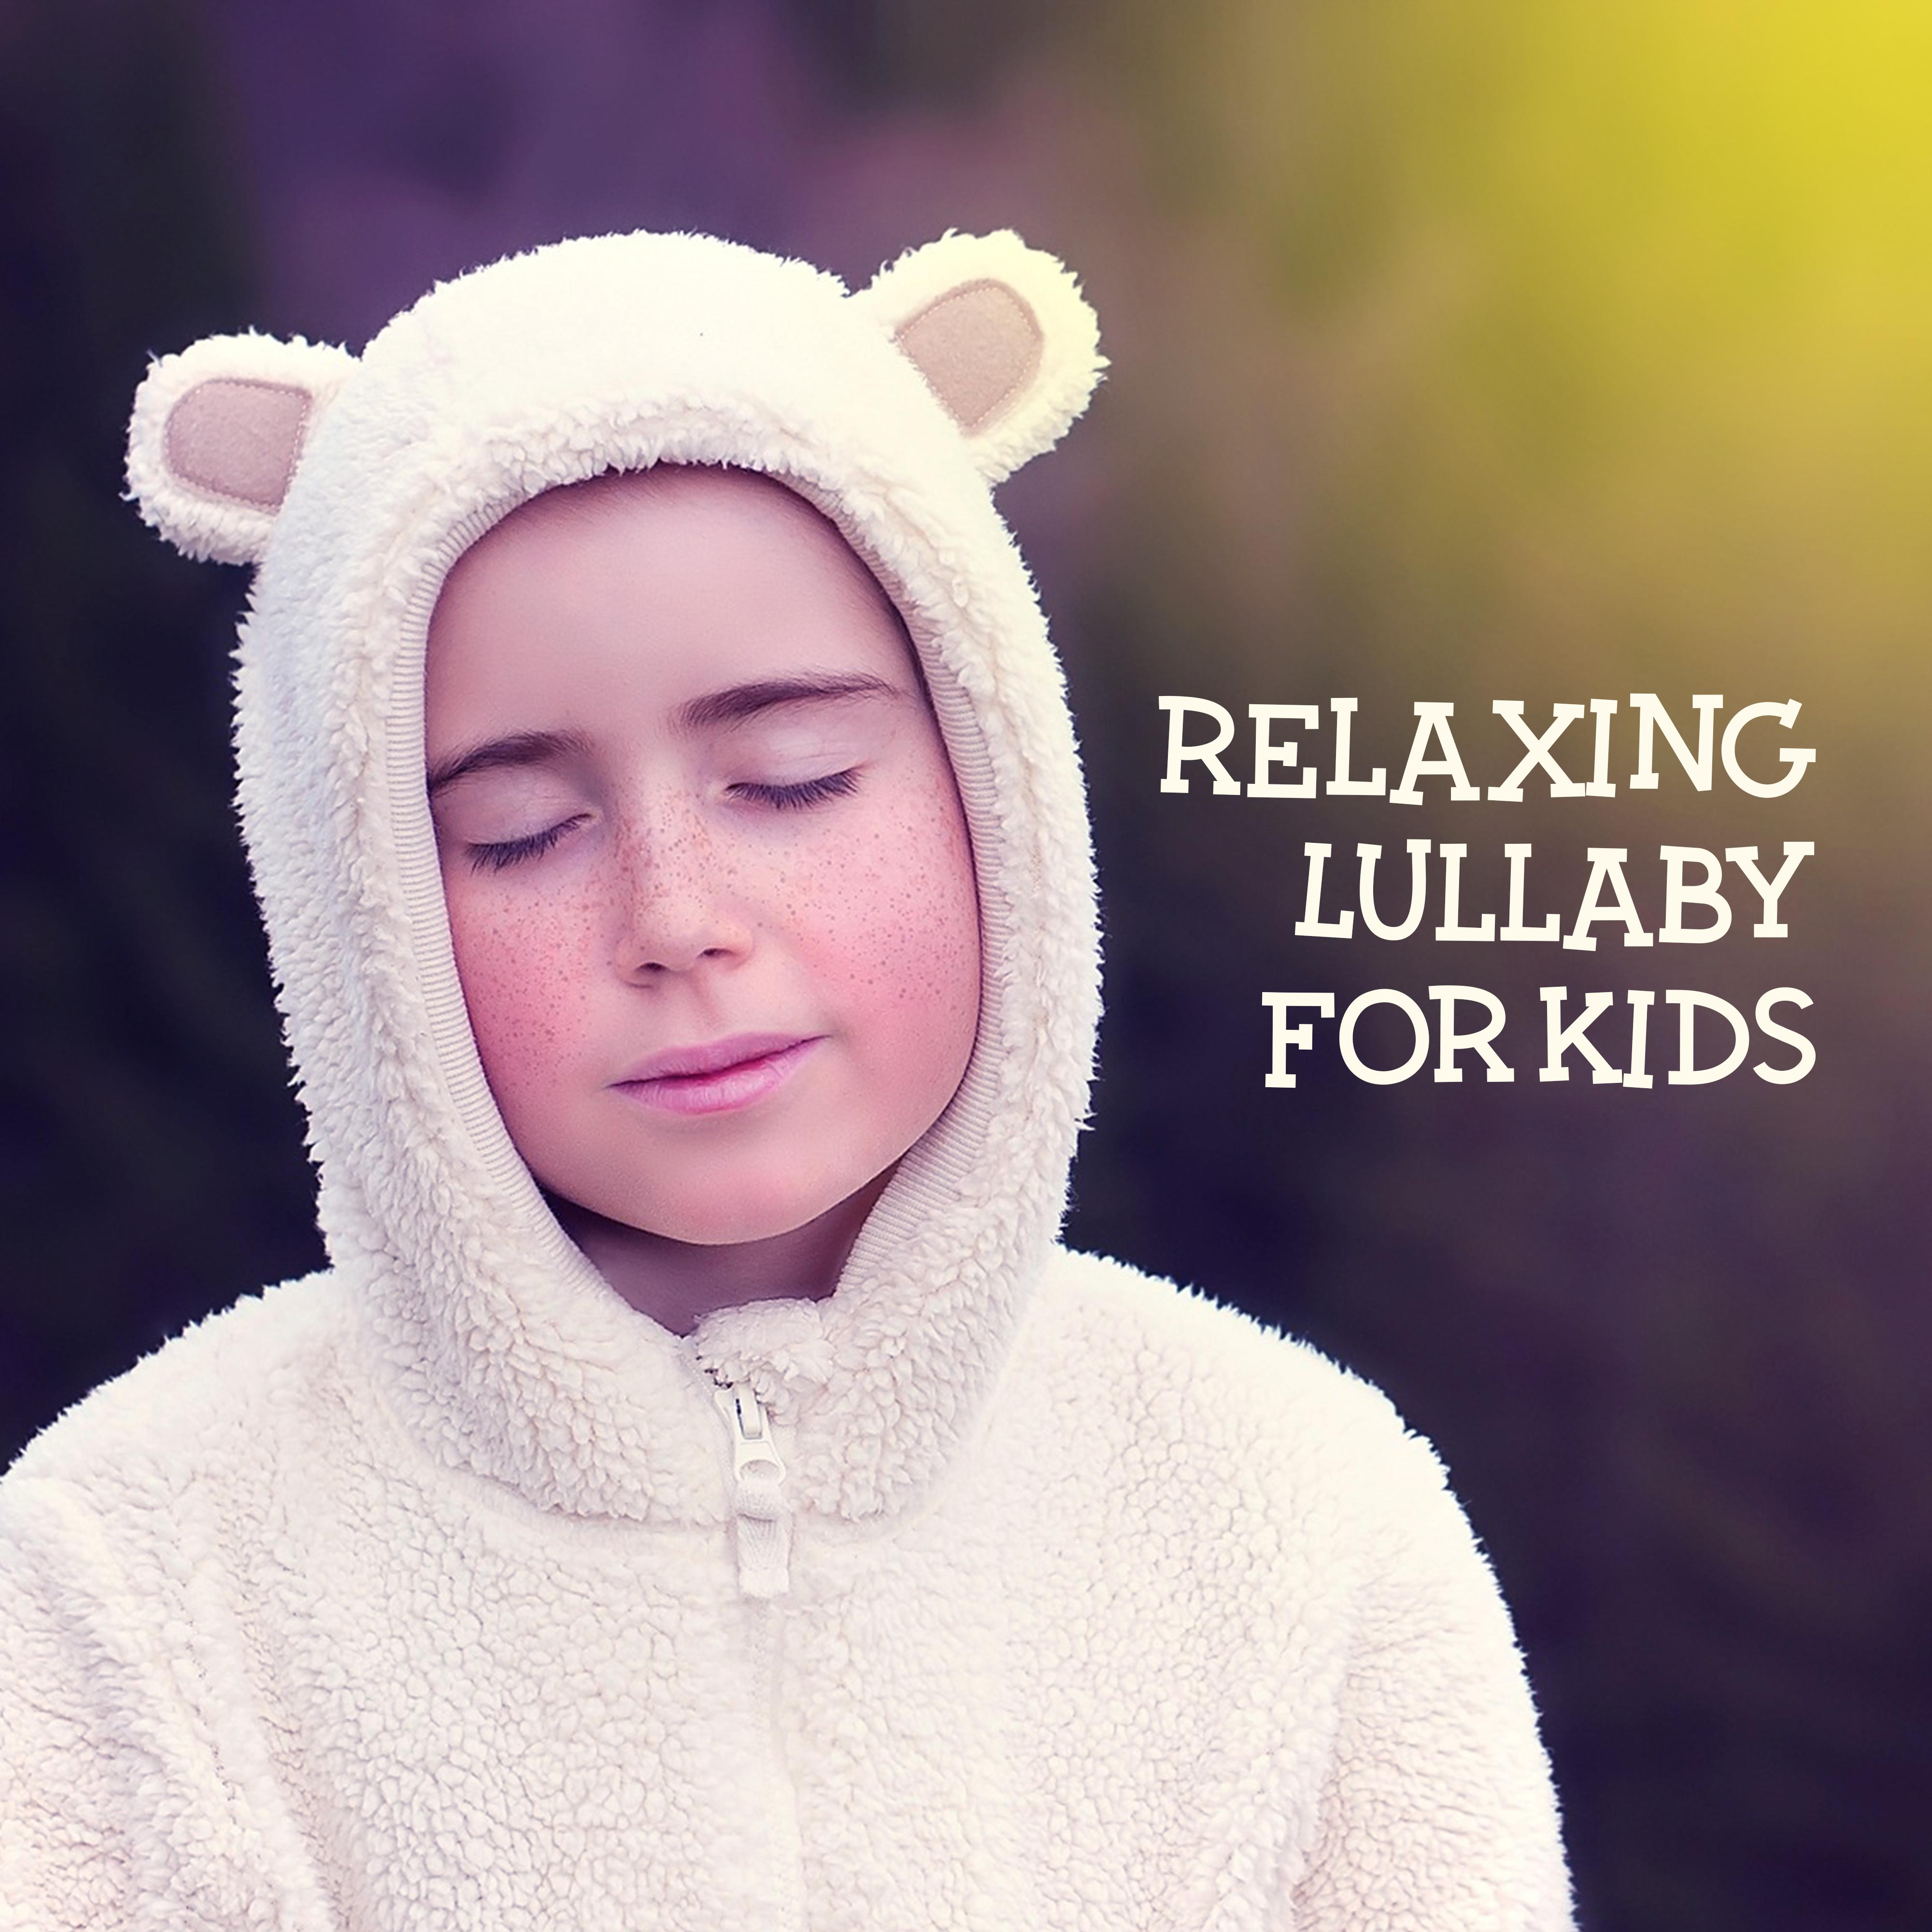 Relaxing Lullaby for Kids – Restful Sleep, Calming Melodies to Bed, Sweet Dreams, Cradle Songs